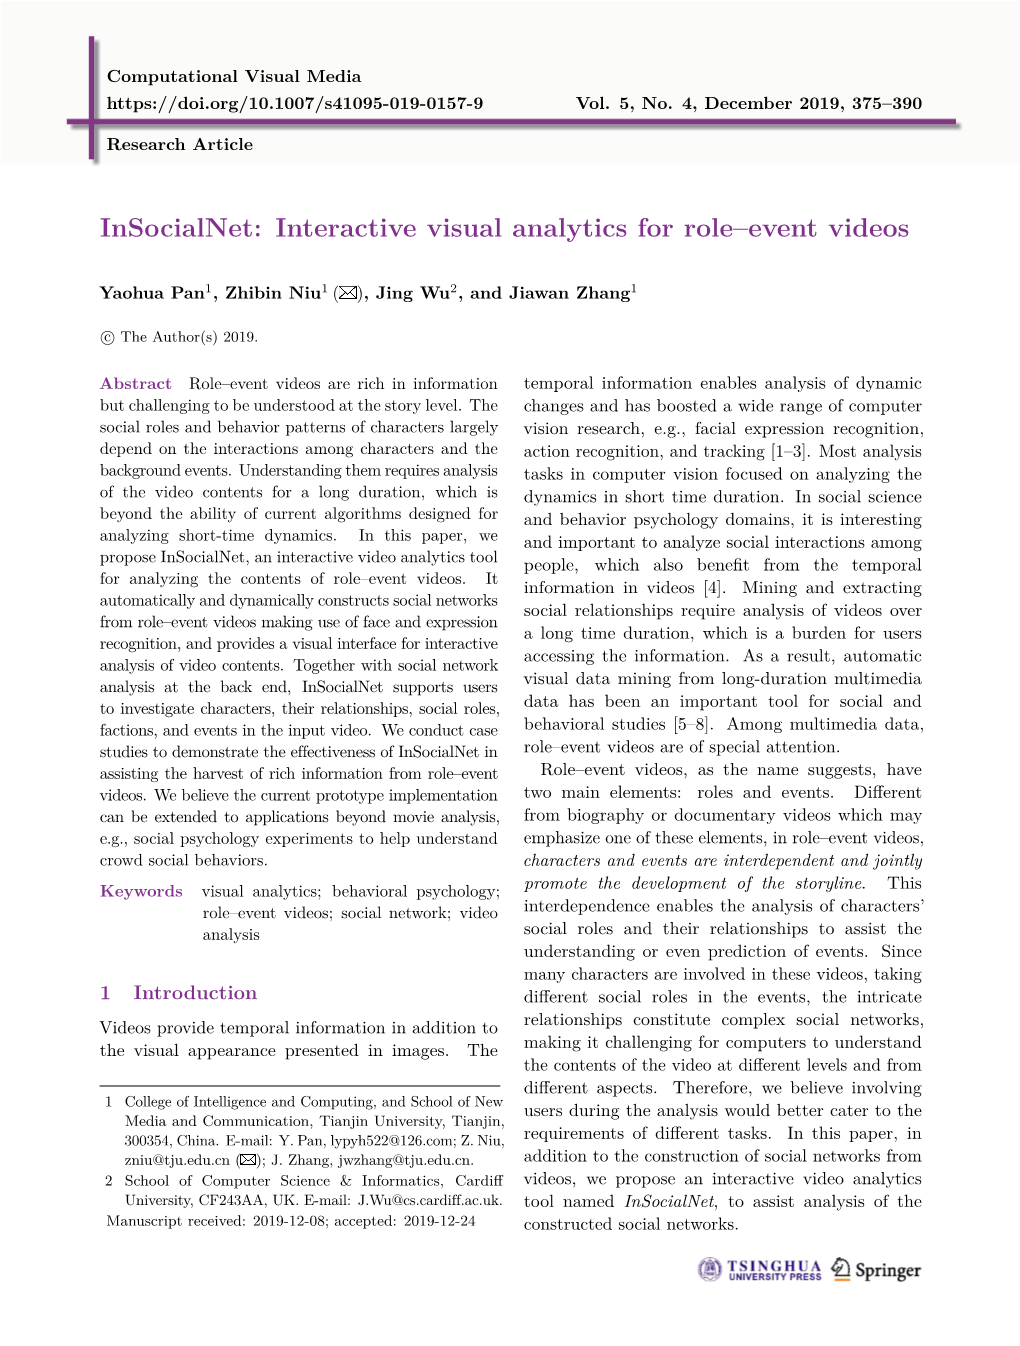 Insocialnet: Interactive Visual Analytics for Role–Event Videos